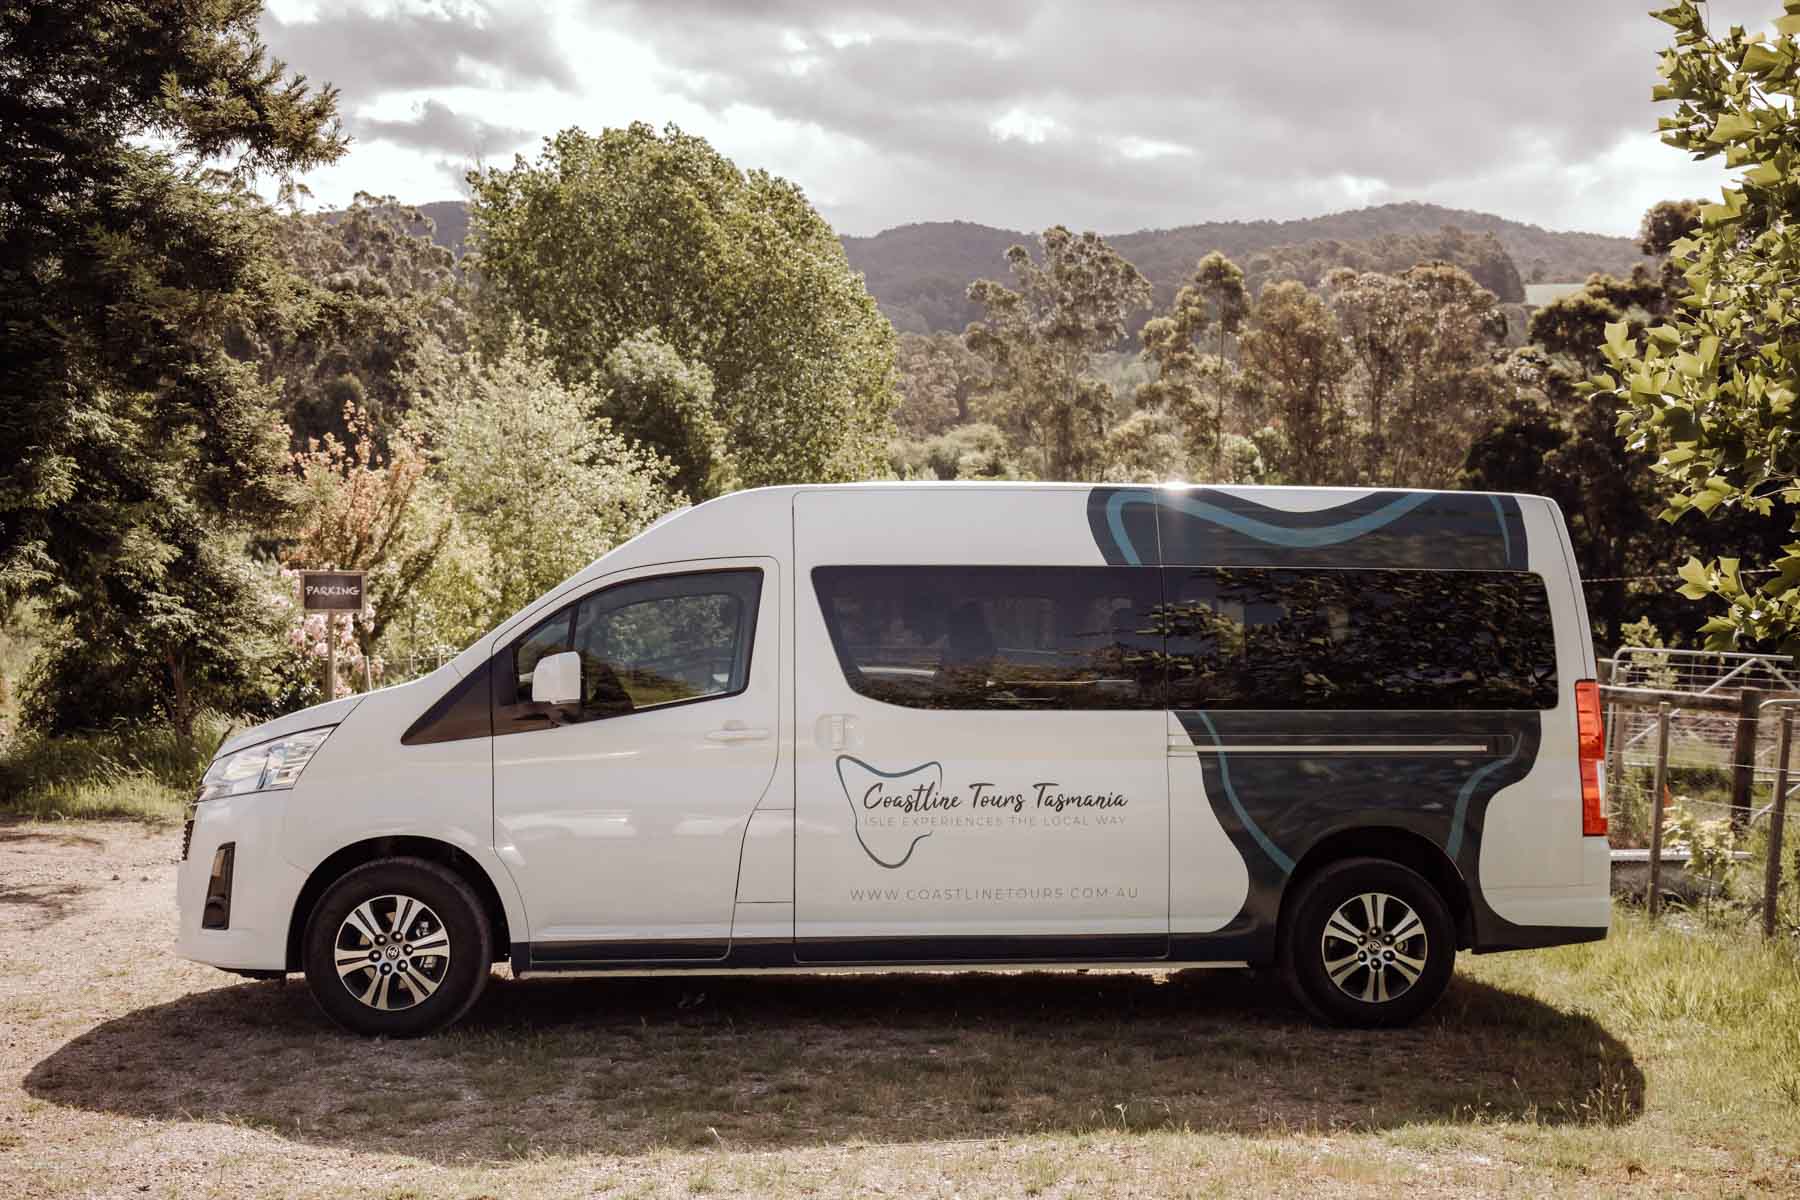 Coastline Tours Tasmania 11 seater bus makes all tours comfortable. Experience modern luxury when you book your north west adventure with us